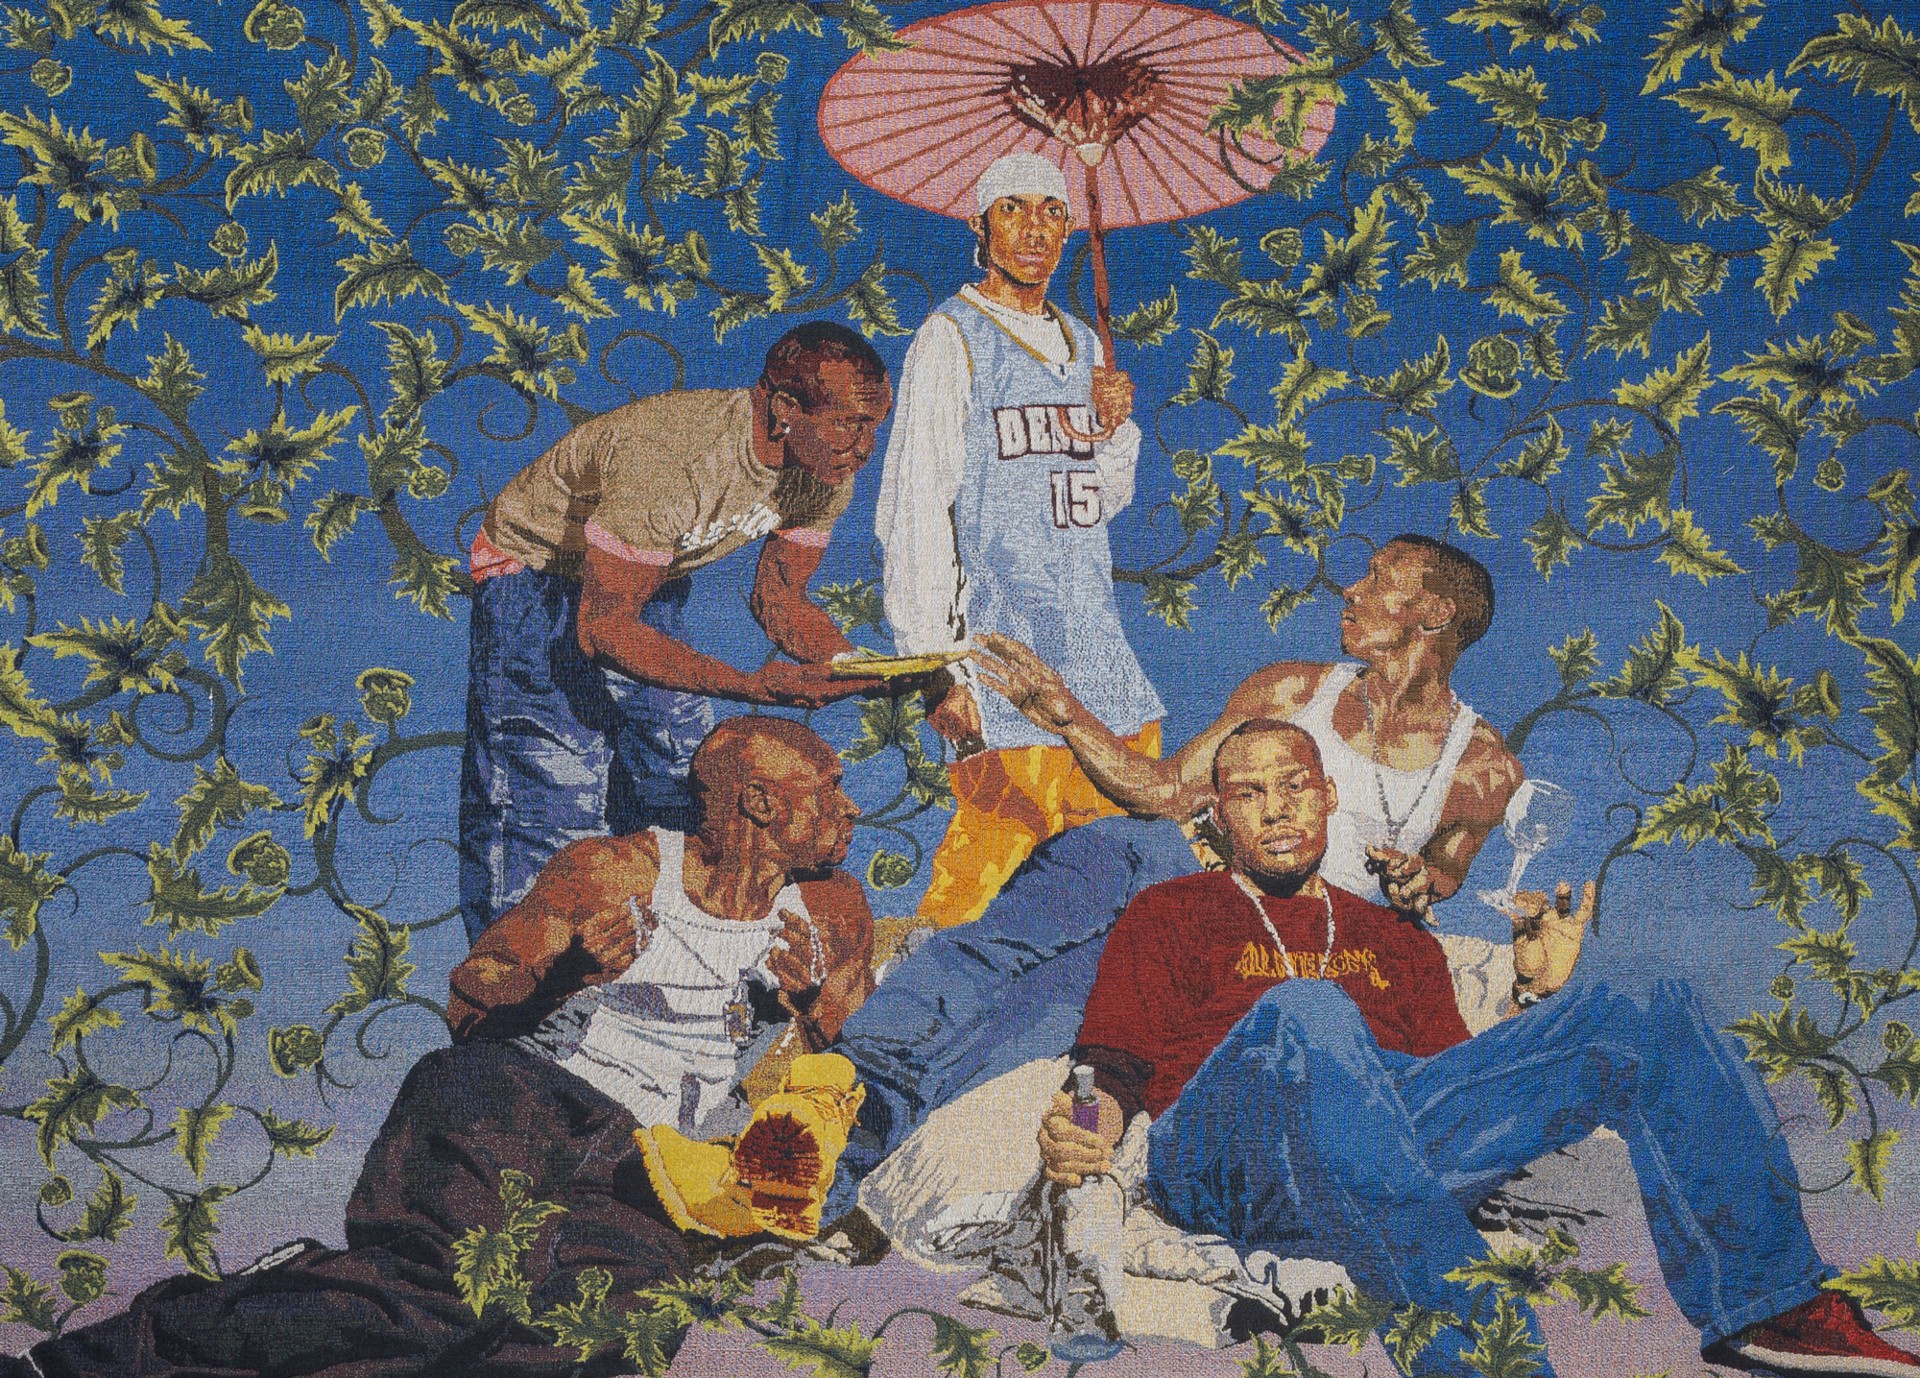 The Gypsy Fortune -Teller by Kehinde Wiley